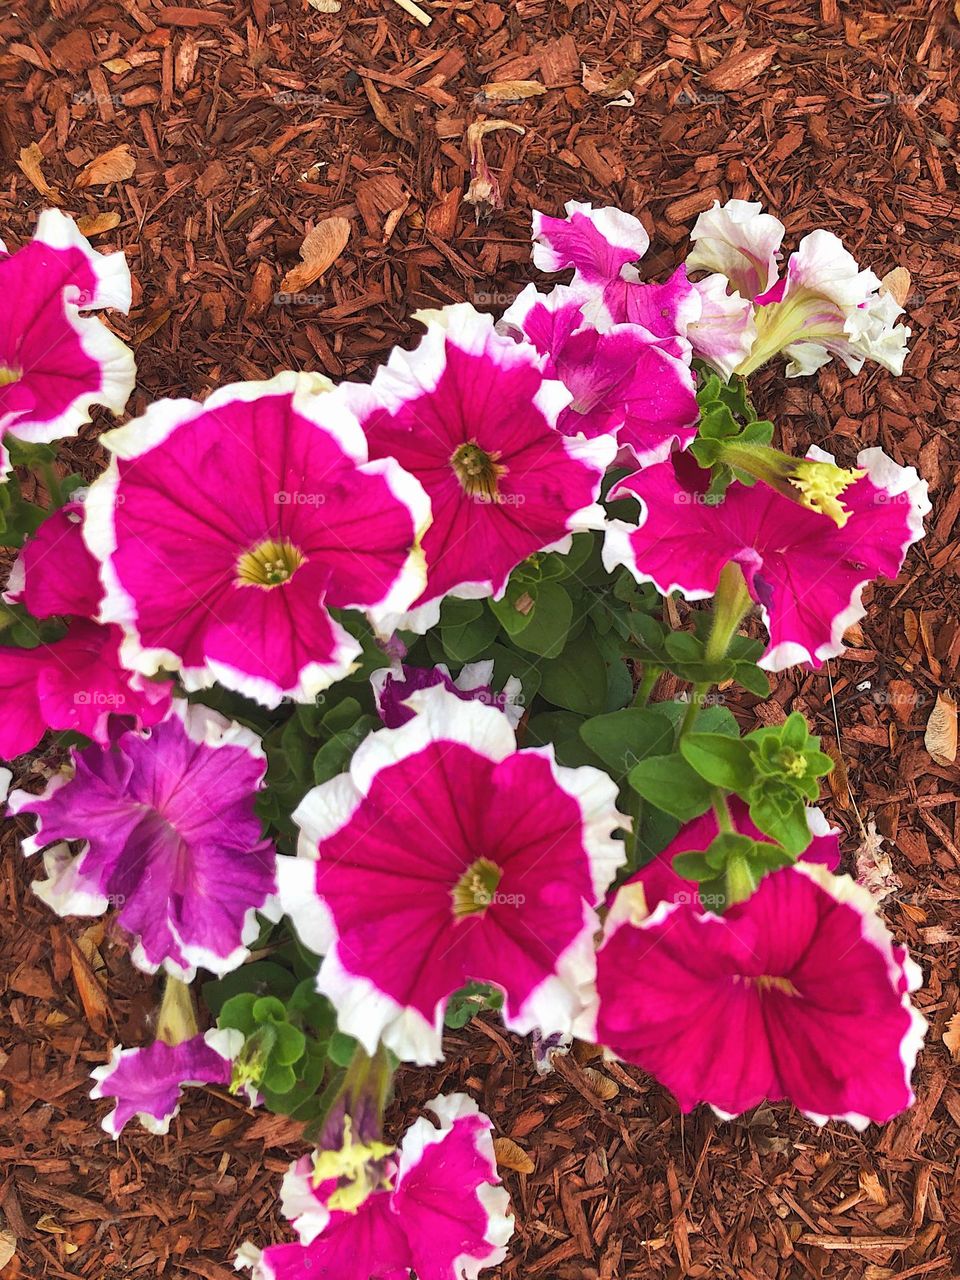 Beautiful pink and white Petunias blooming in the garden in the sunlight during the Spring season in Massachusetts.